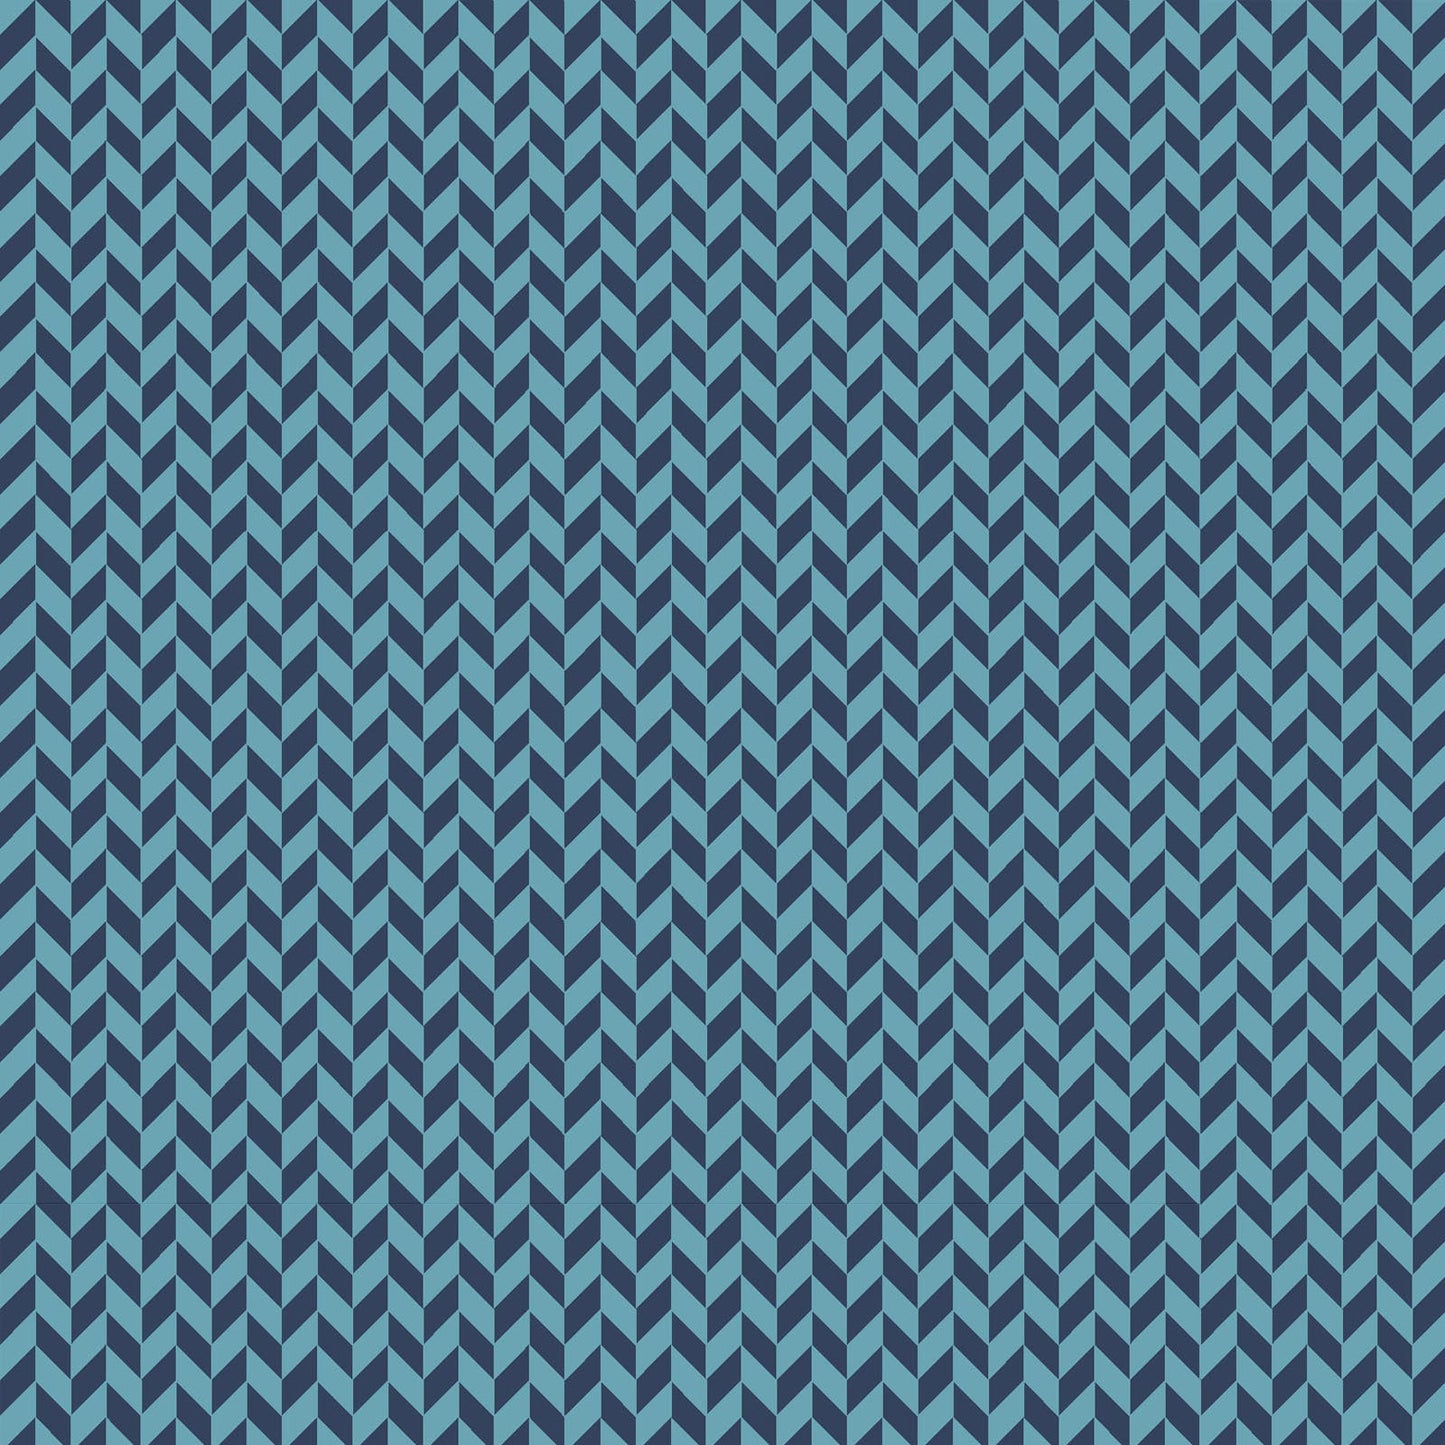 Herringbone in navy (MAS9397-N) is part of the Kimberbell Basics line designed by Kim Christopherson for Maywood Studio. This fabric features a two-tone navy herringbone and adds a sophisticated texture to projects.